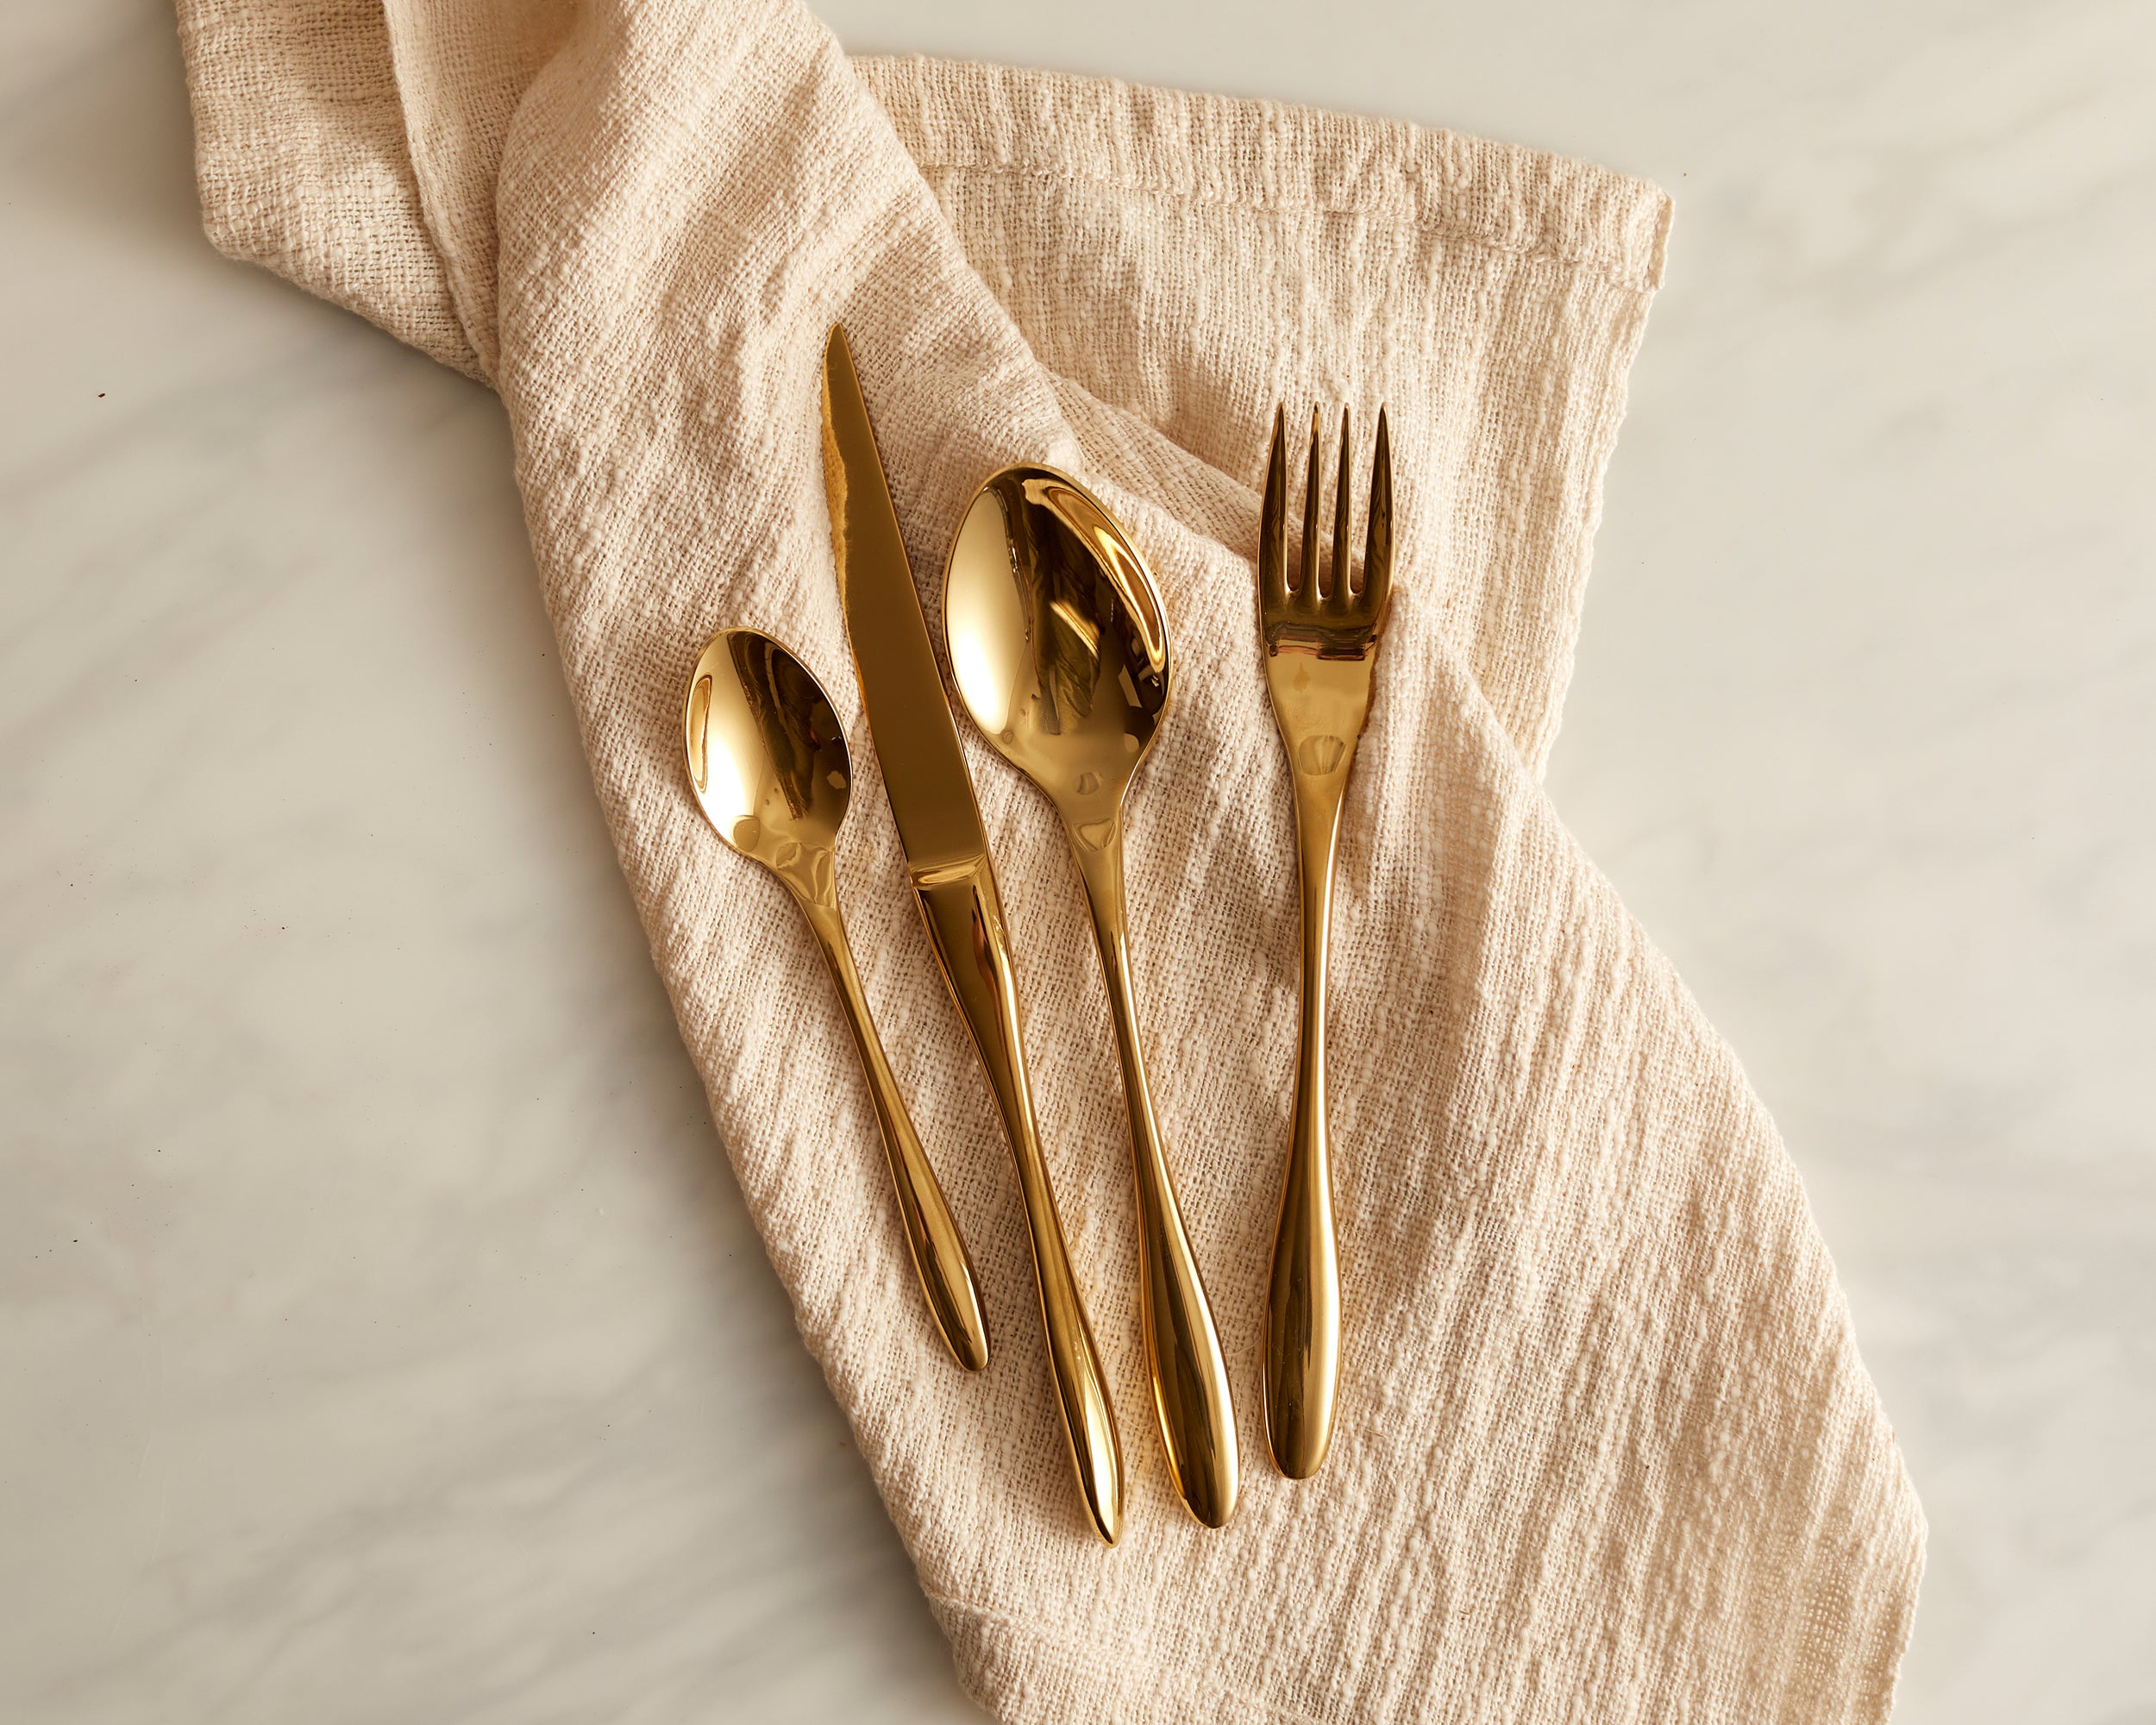 Stainless Steel Gold Cutlery Set Restaurant Quality from What a Host Home Decor